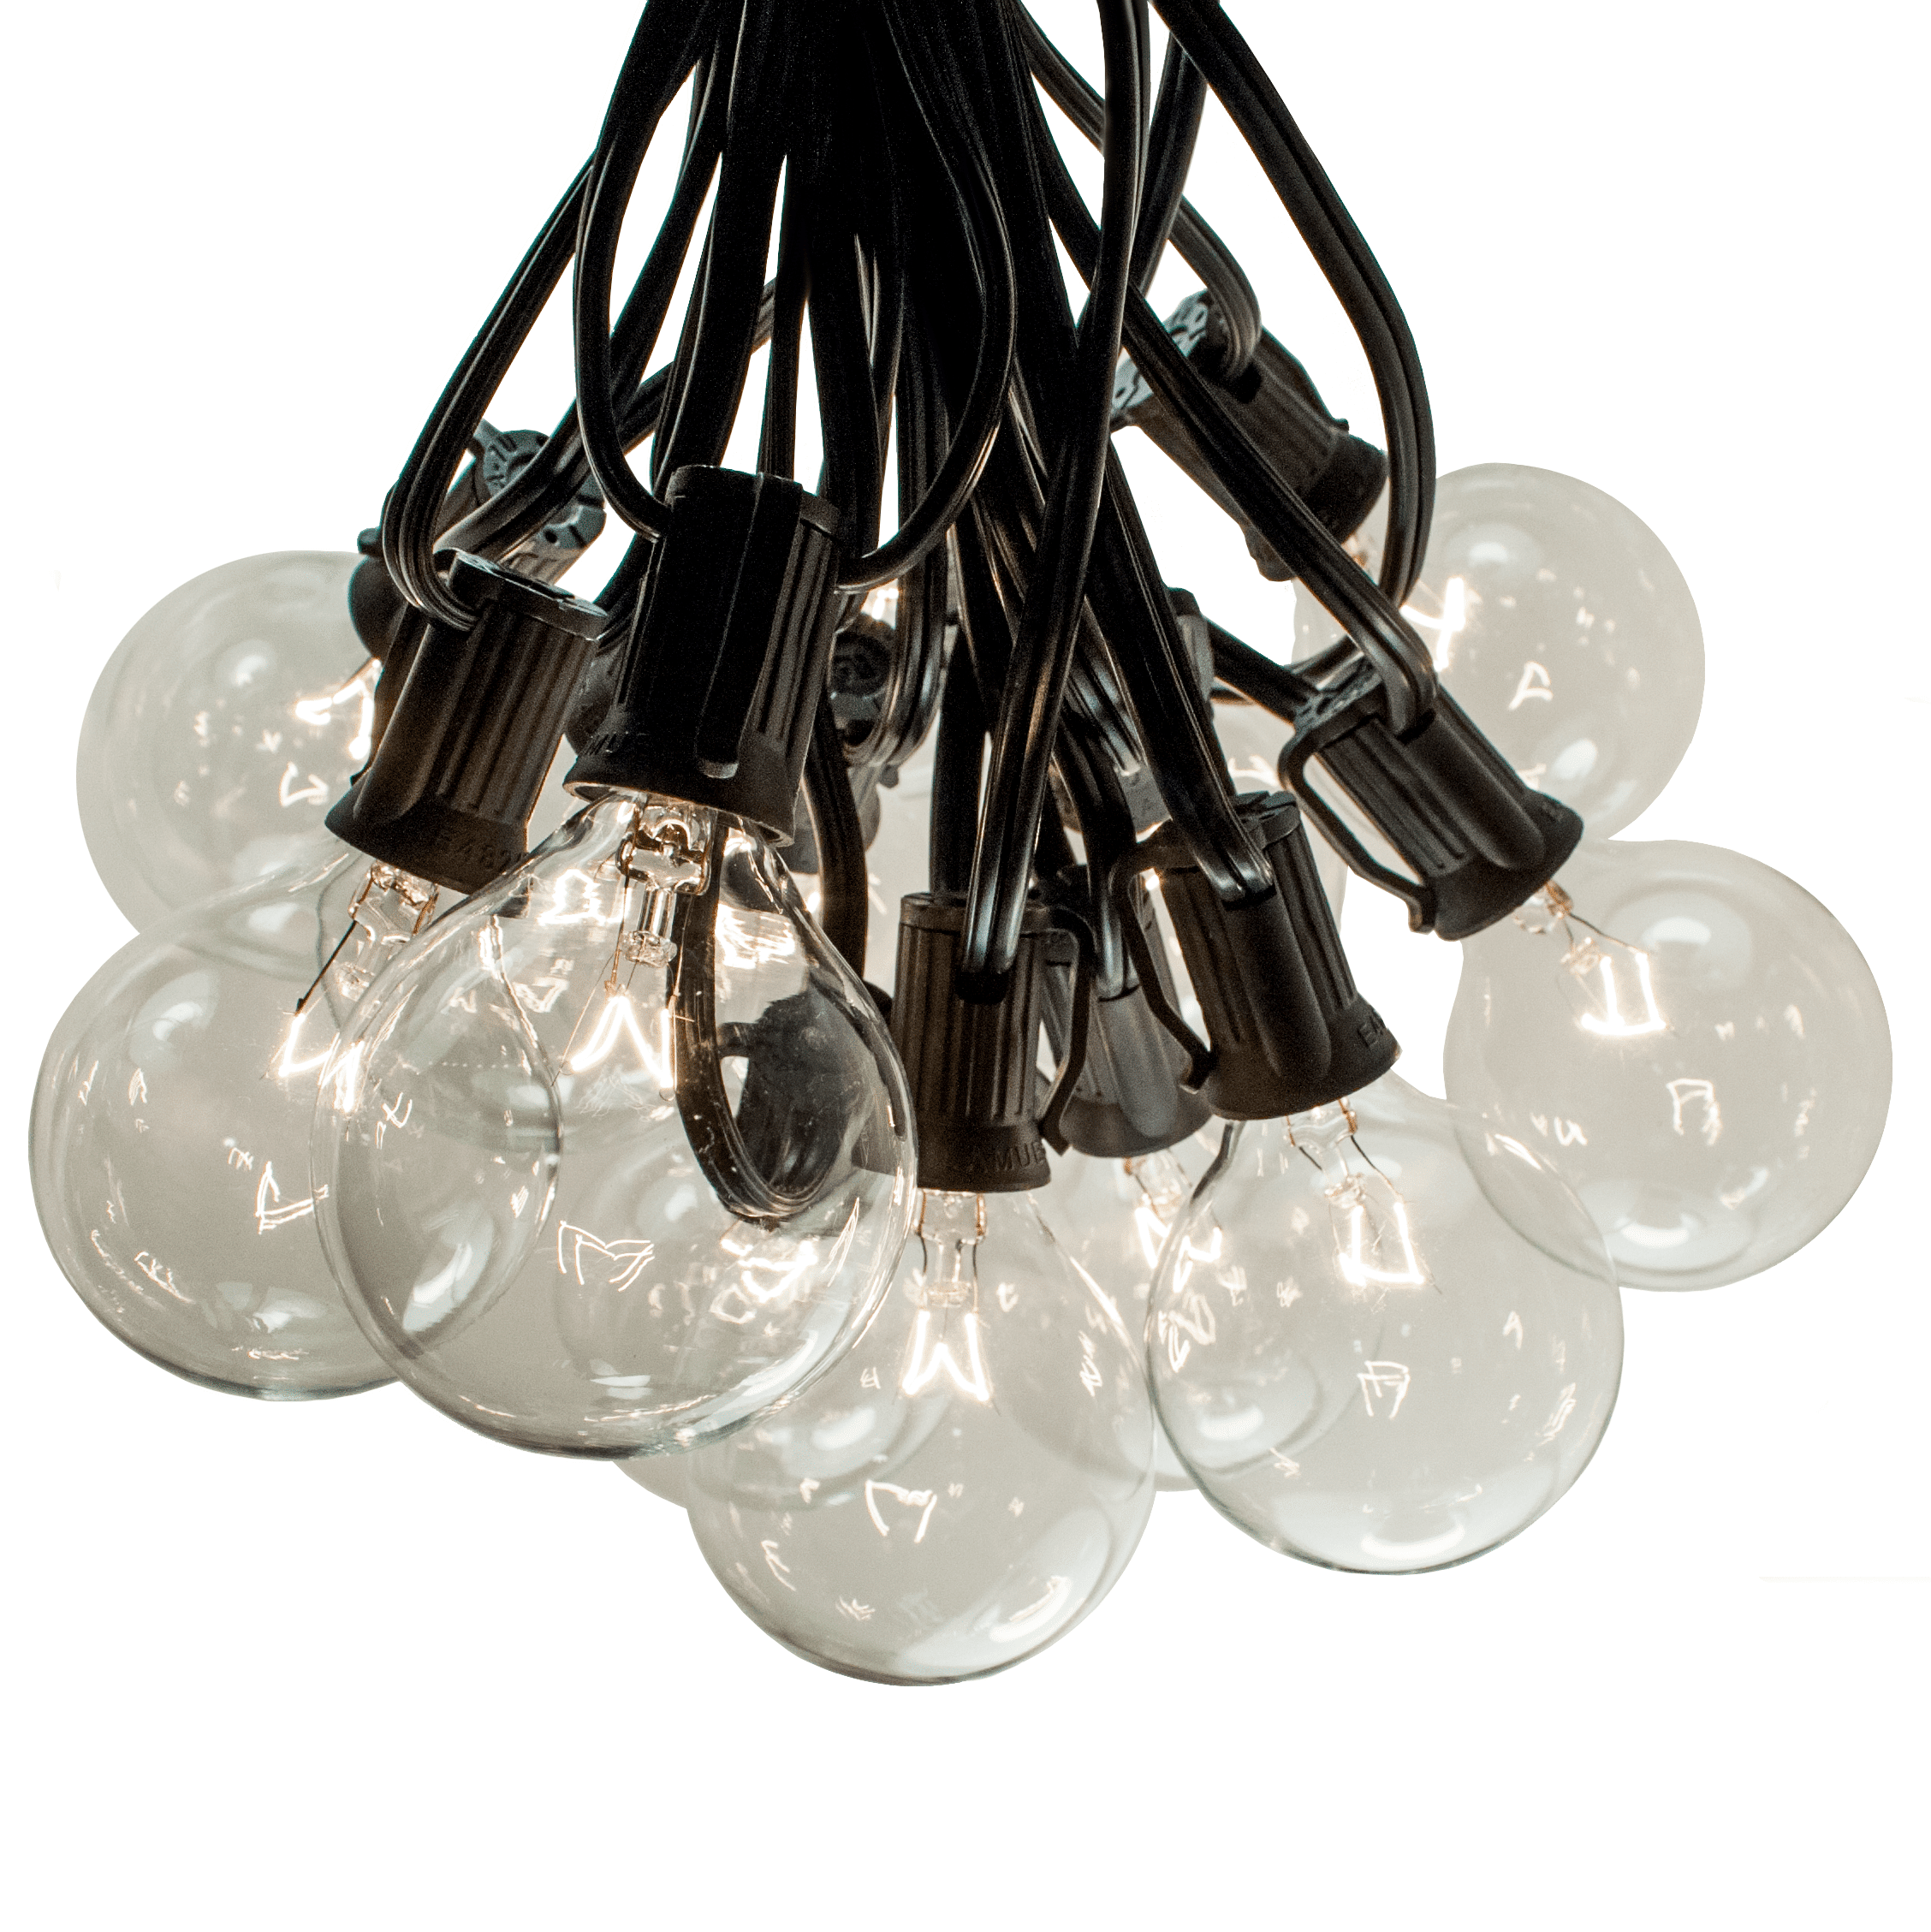 G30 Clear Outdoor Globe Patio String Lights 50', 100' and 25' Lengths 